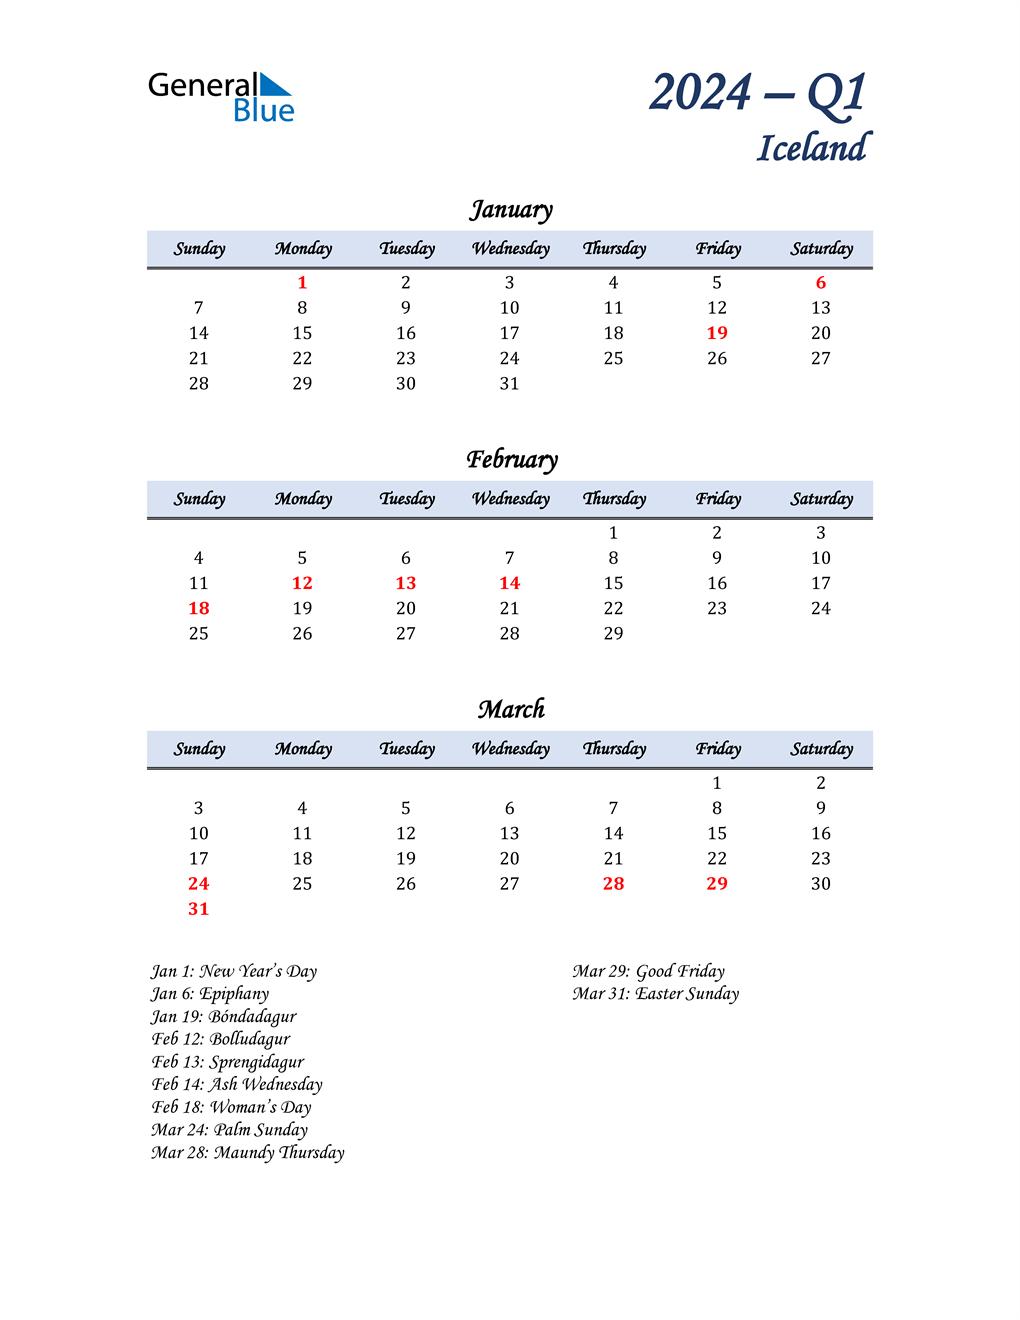  January, February, and March Calendar for Iceland